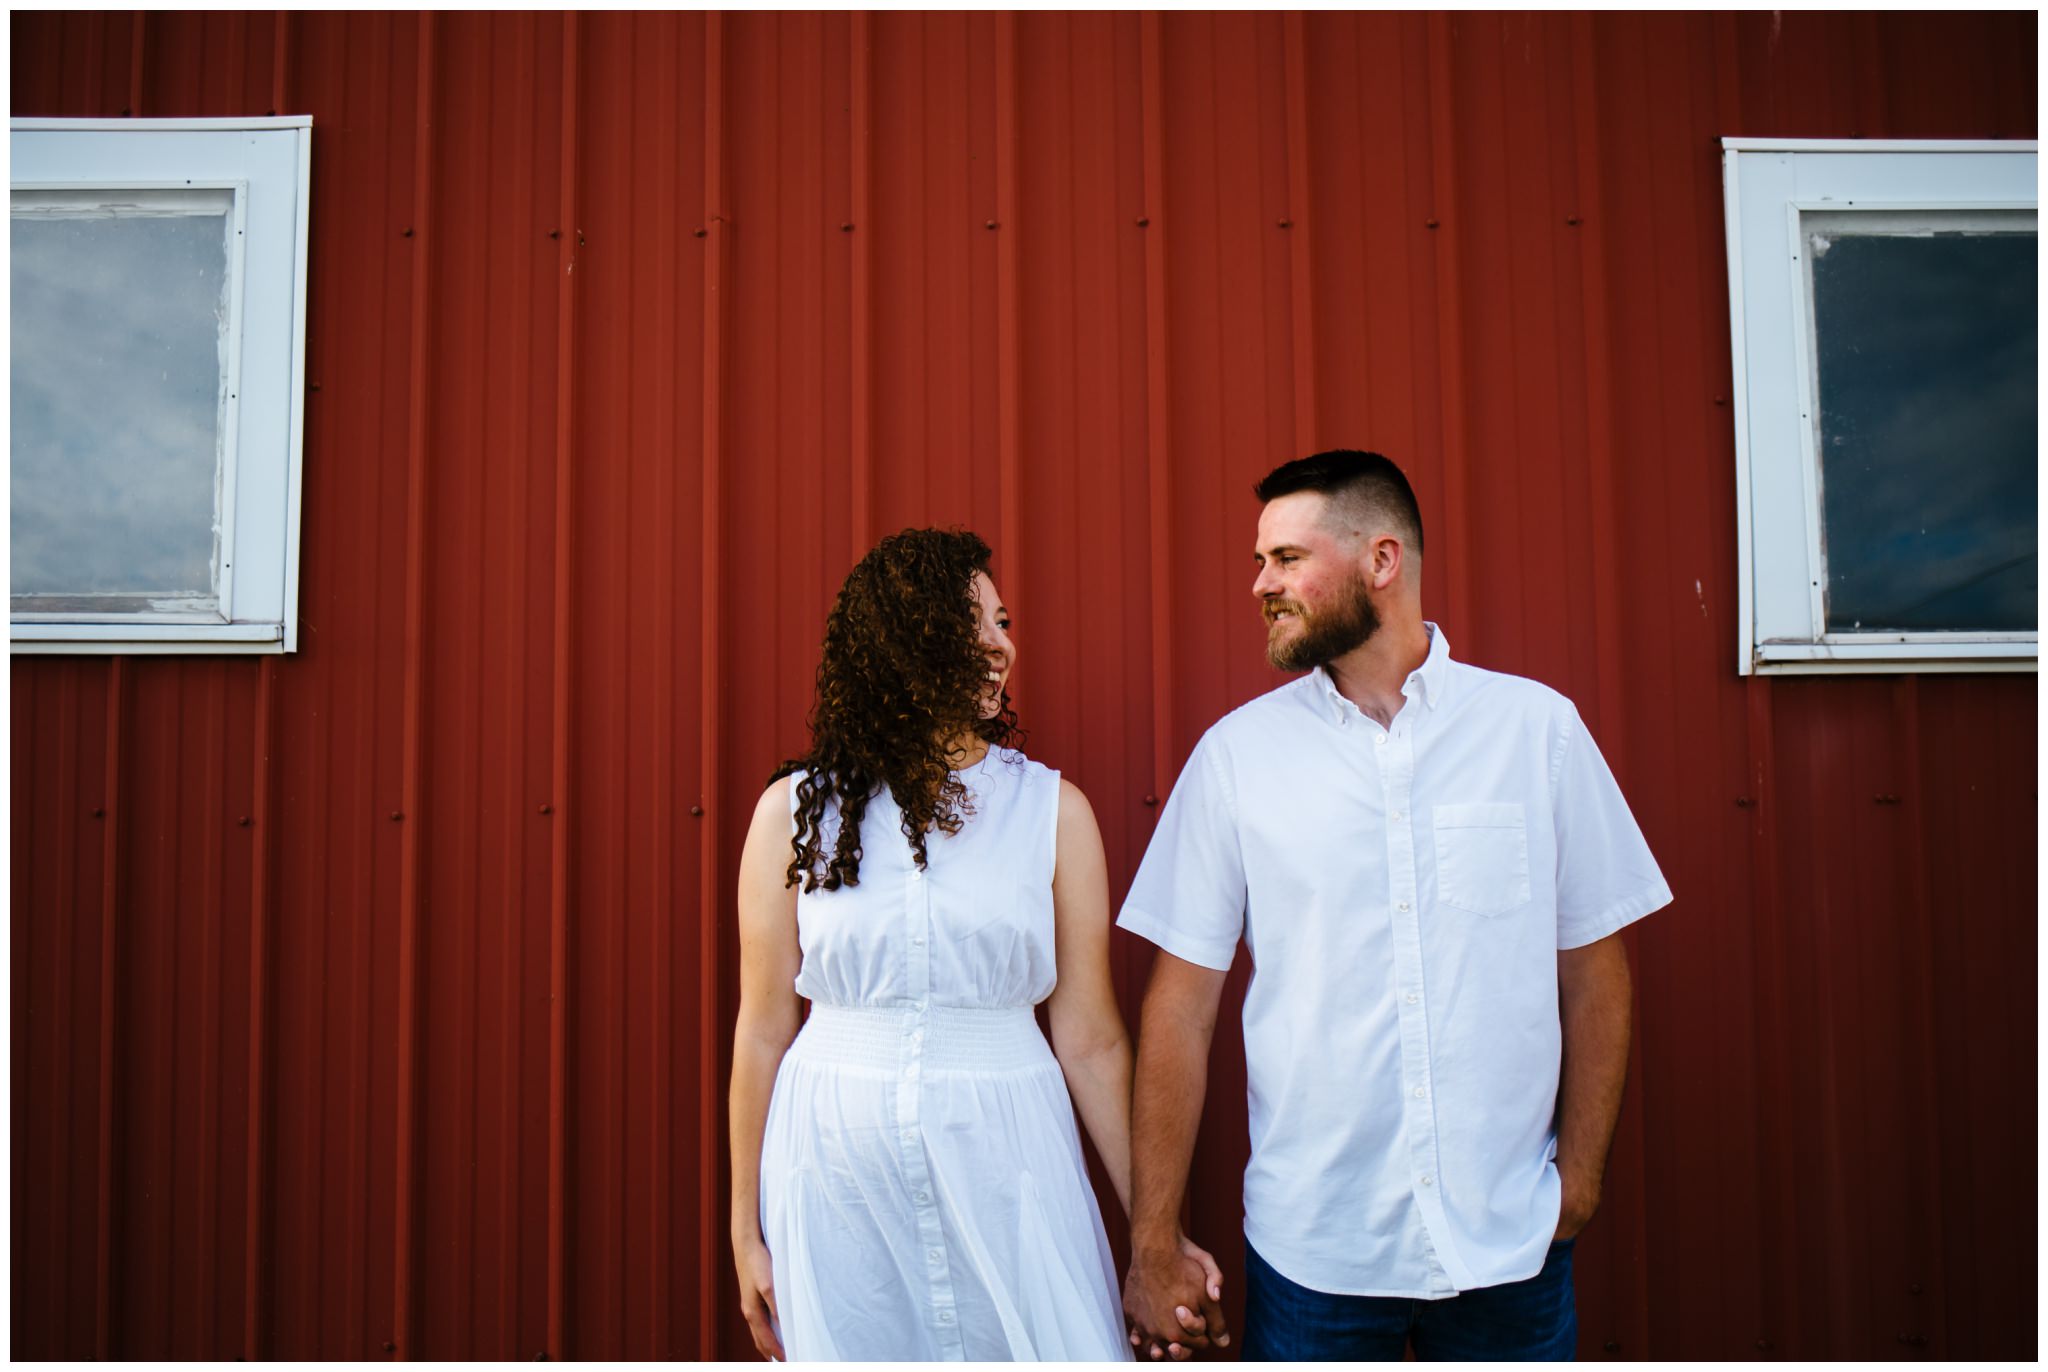 A man and woman smile at each other in front of a red barn, during their summer engagement session.